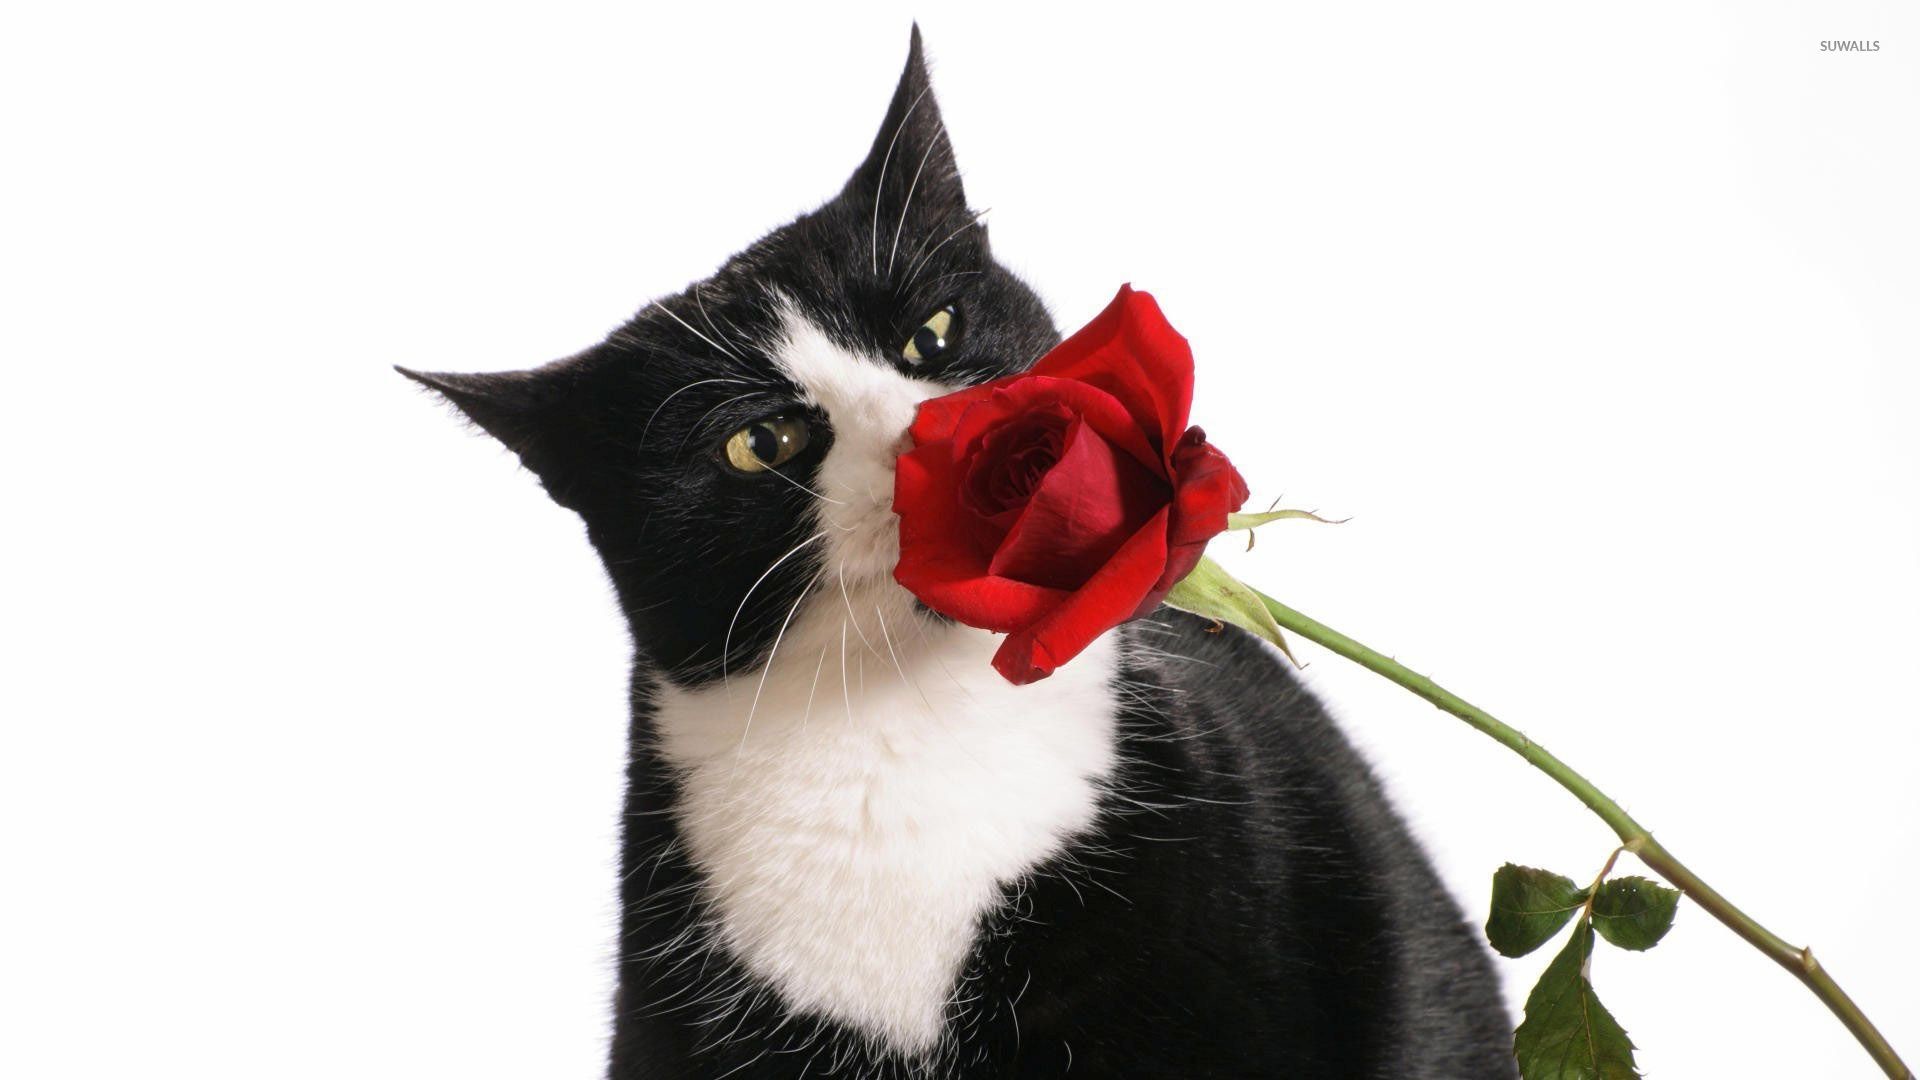 1920x1080 Black and white cat sniffing a red rose wallpaper